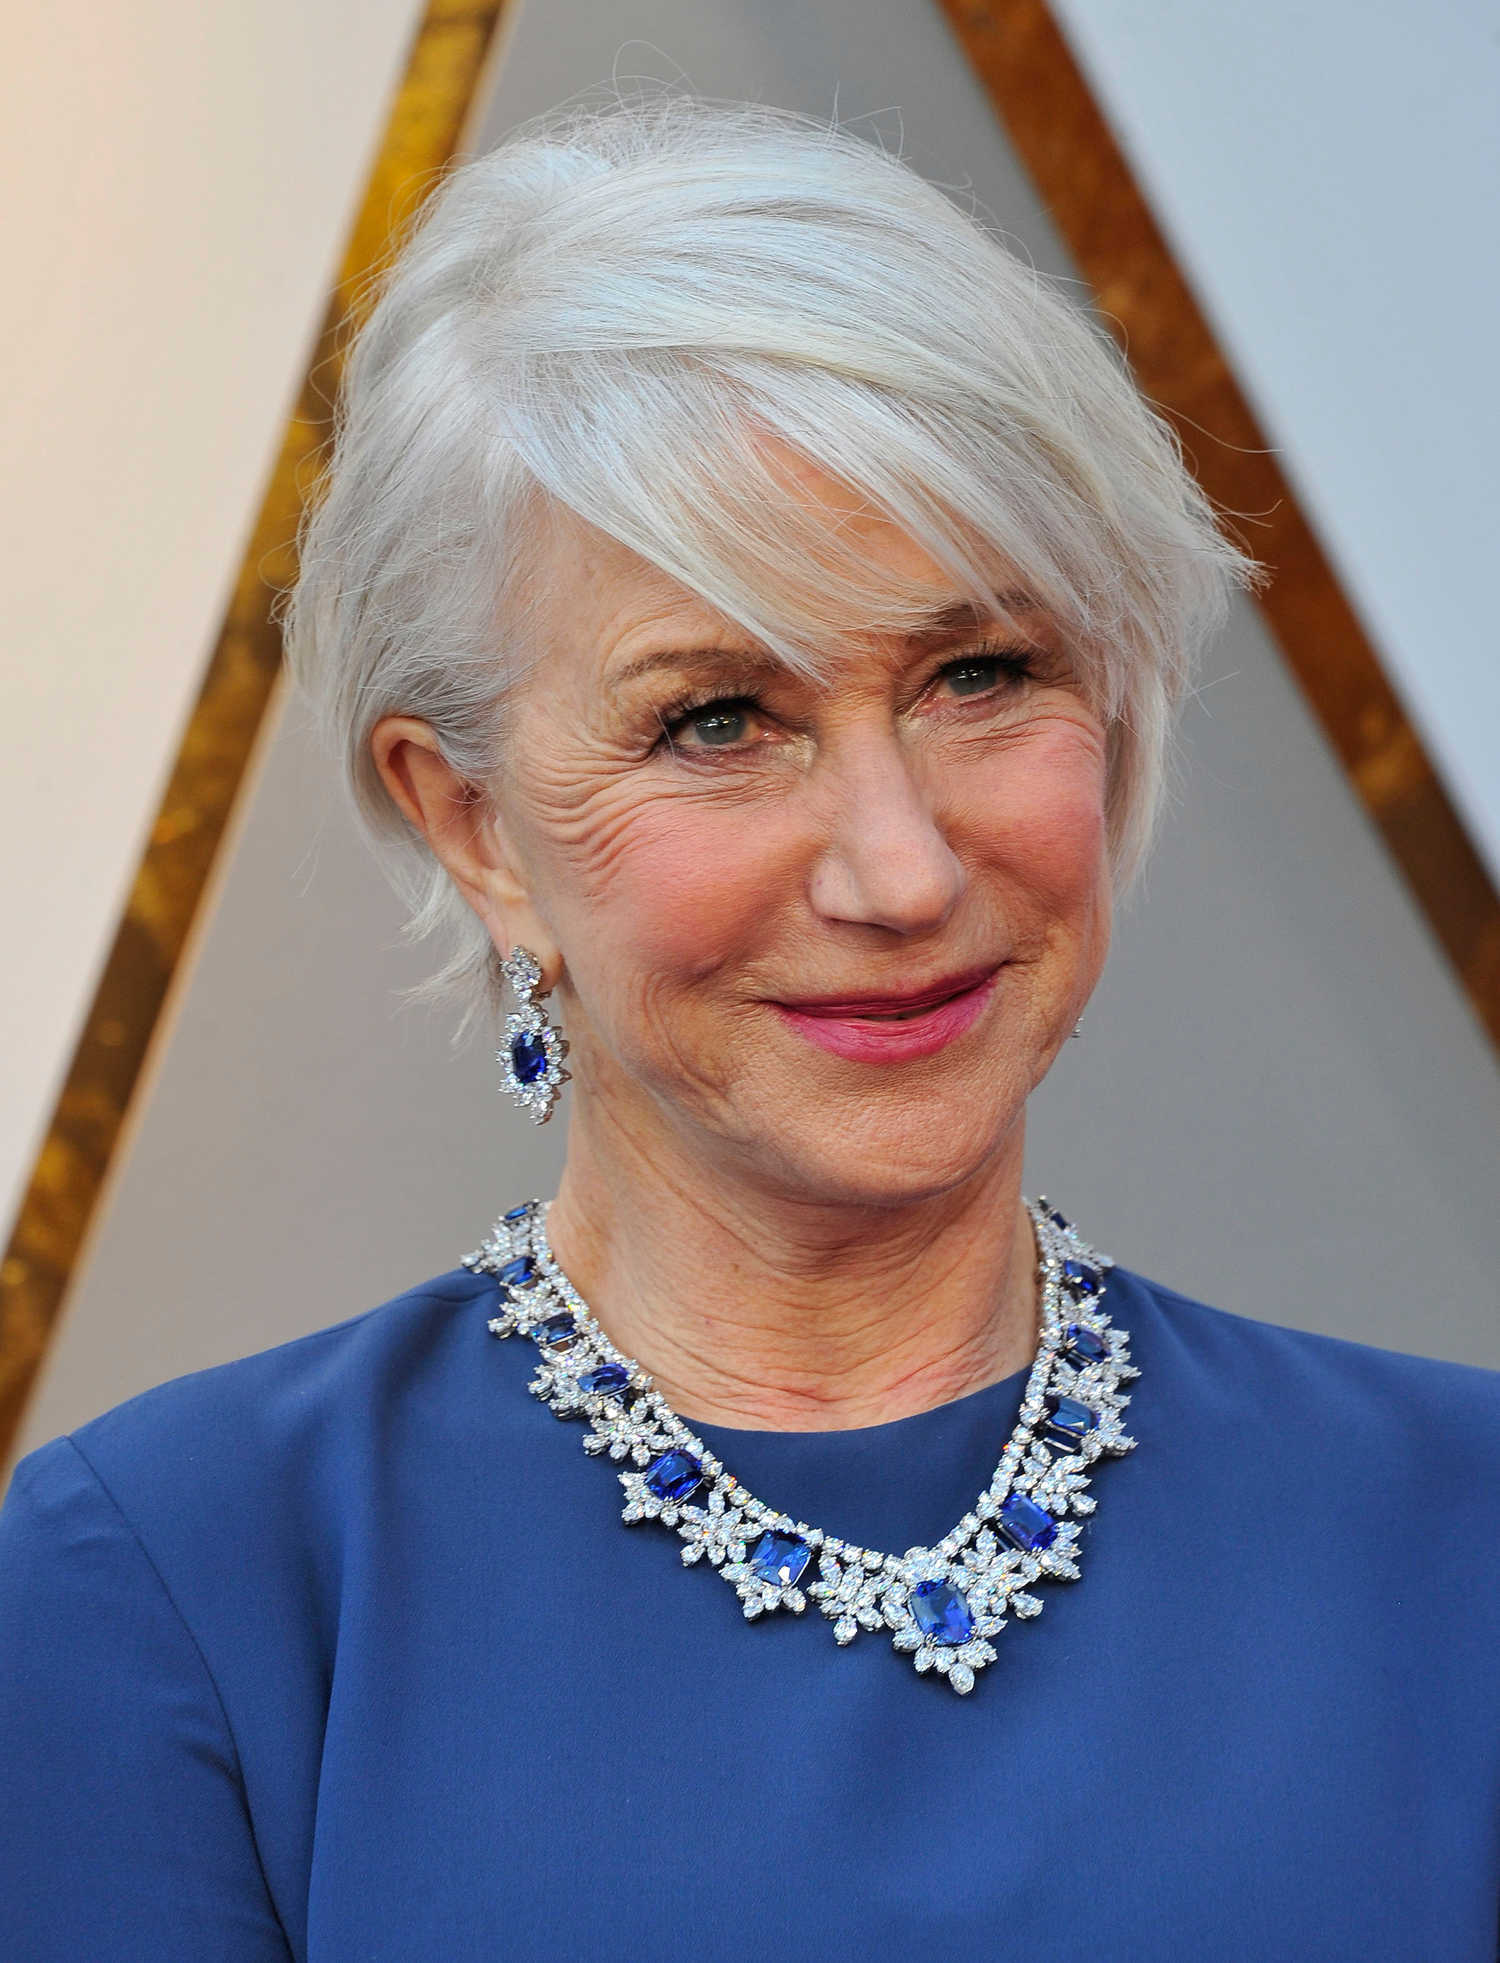 Helen Mirren at the 90th Annual Academy Awards in Los Angeles – Celeb Donut